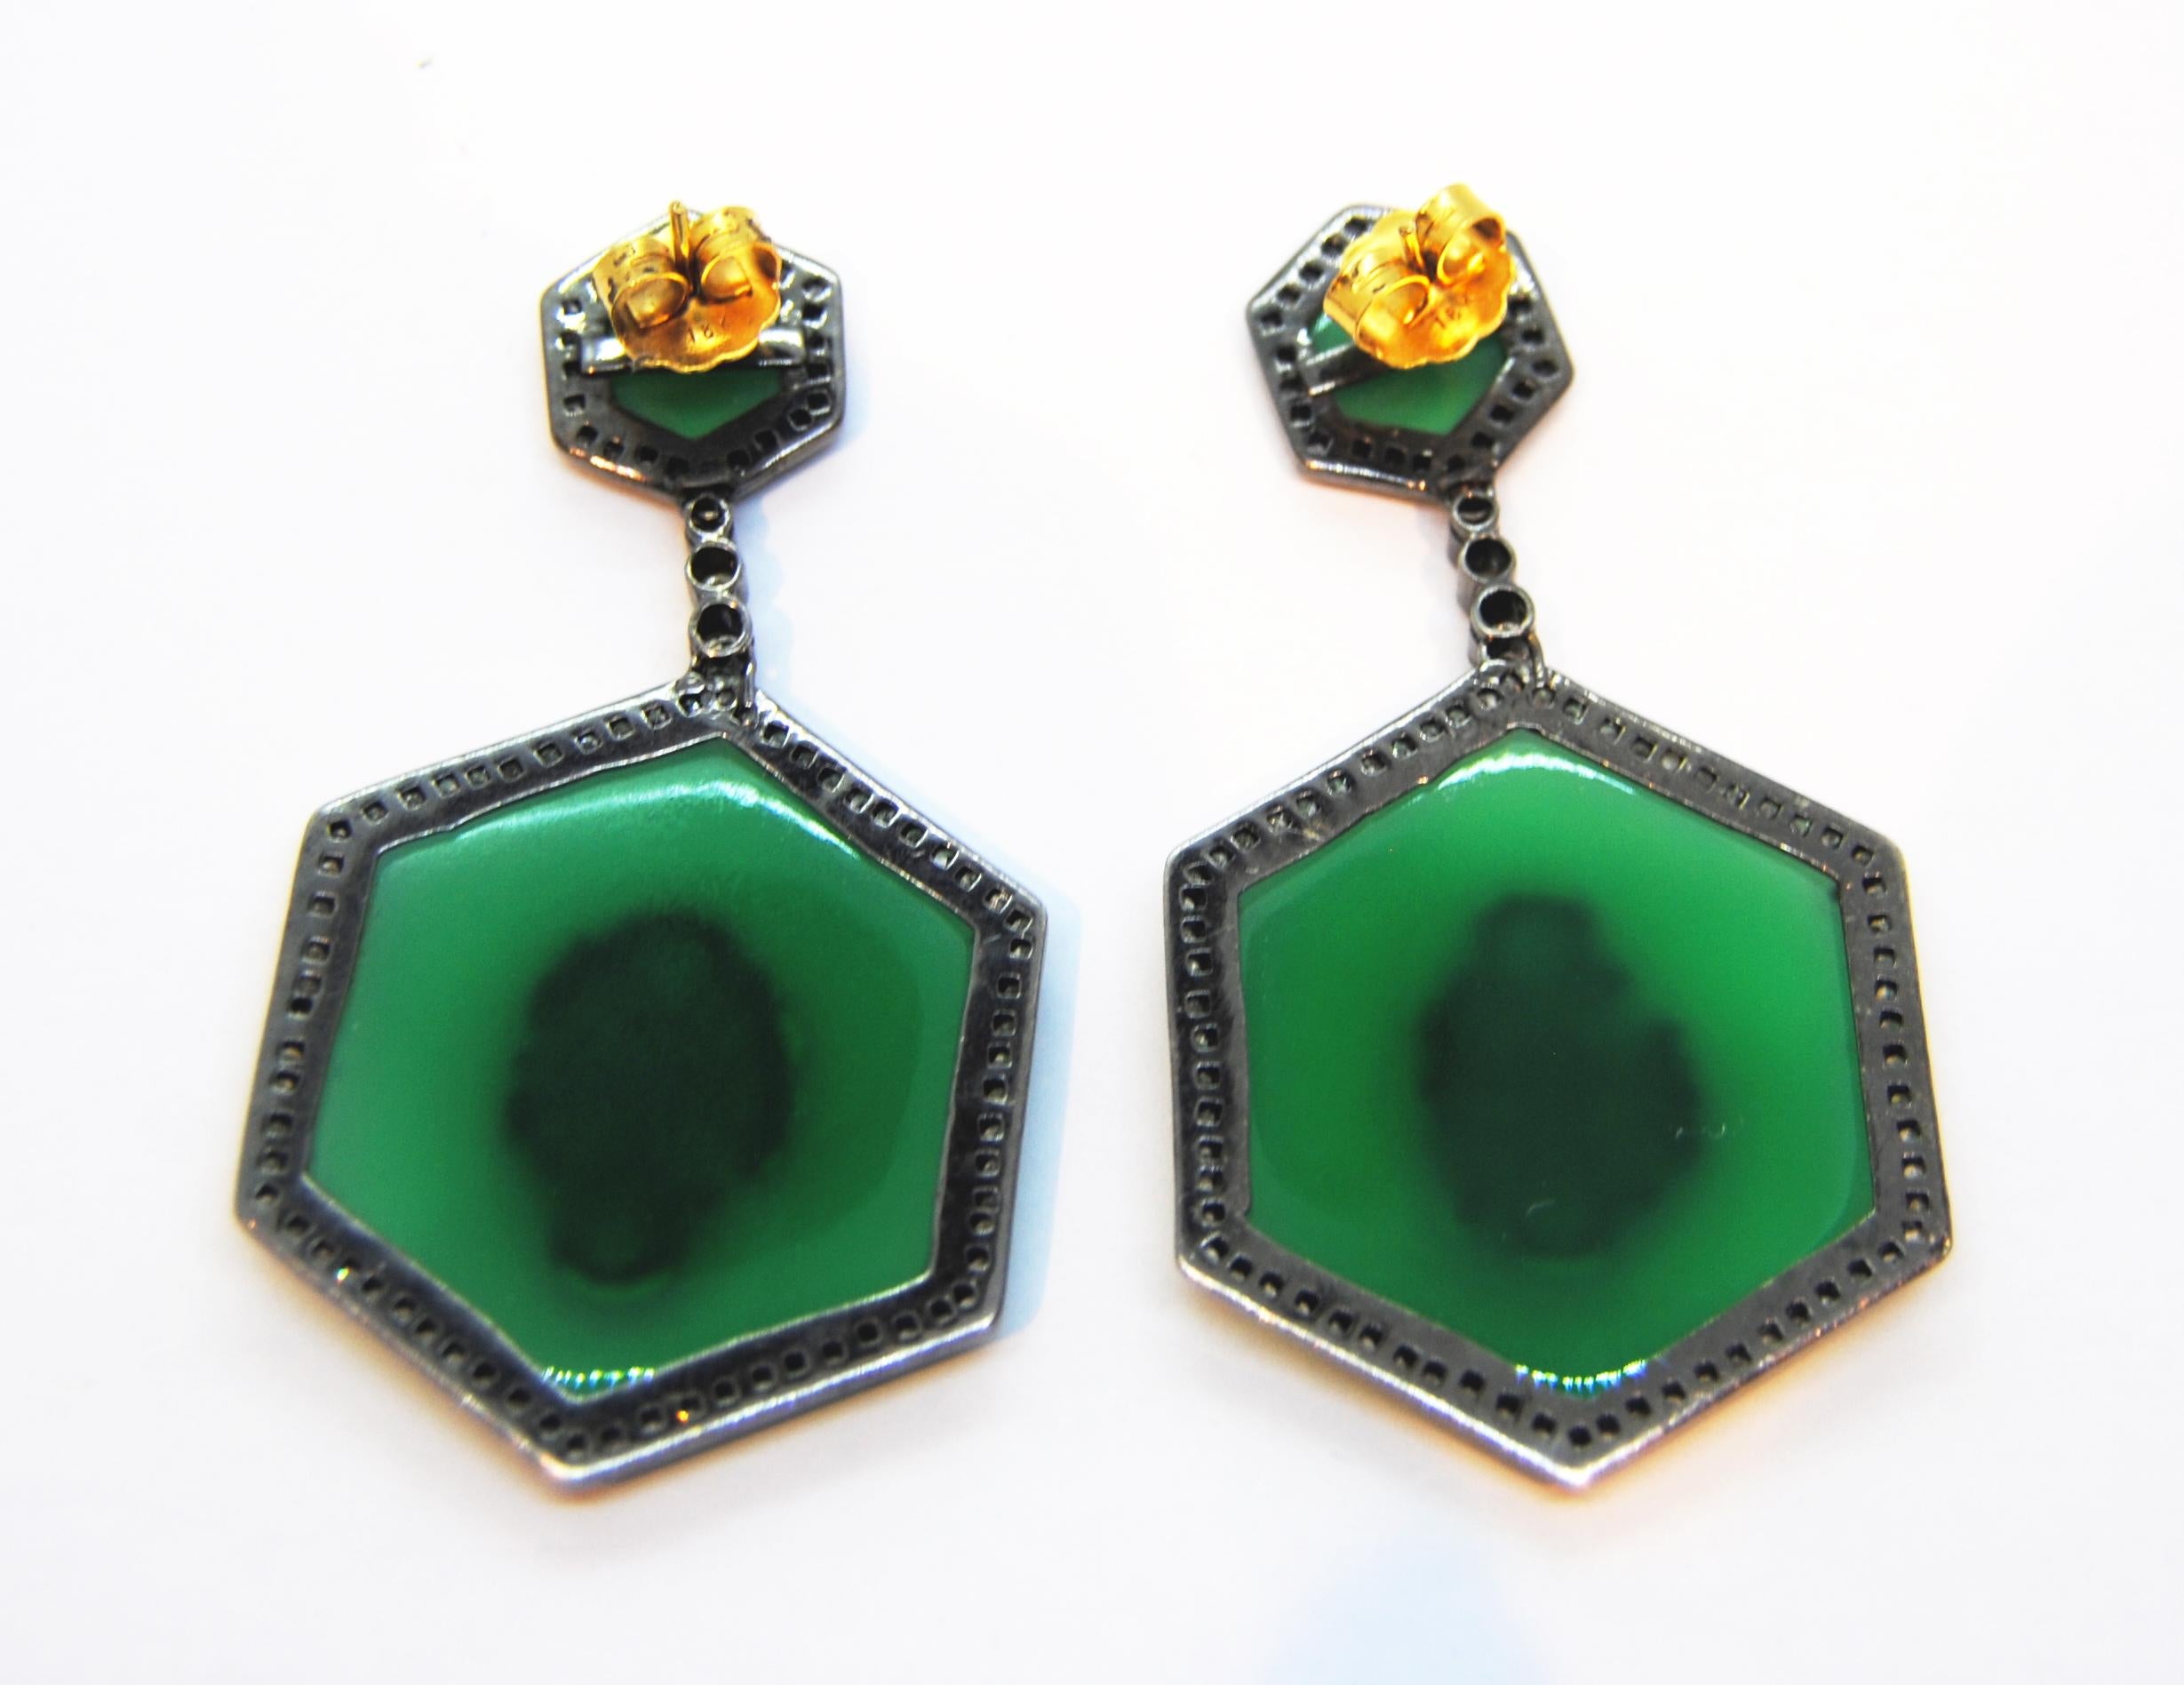 Irama Pradera is a Young designer from Spain that searches always for the best gems and combines classic with contemporary mounting and styles. 
Sleekly crafted in 18K yellow gold and silver  these classic and  natural green agate give a chic and